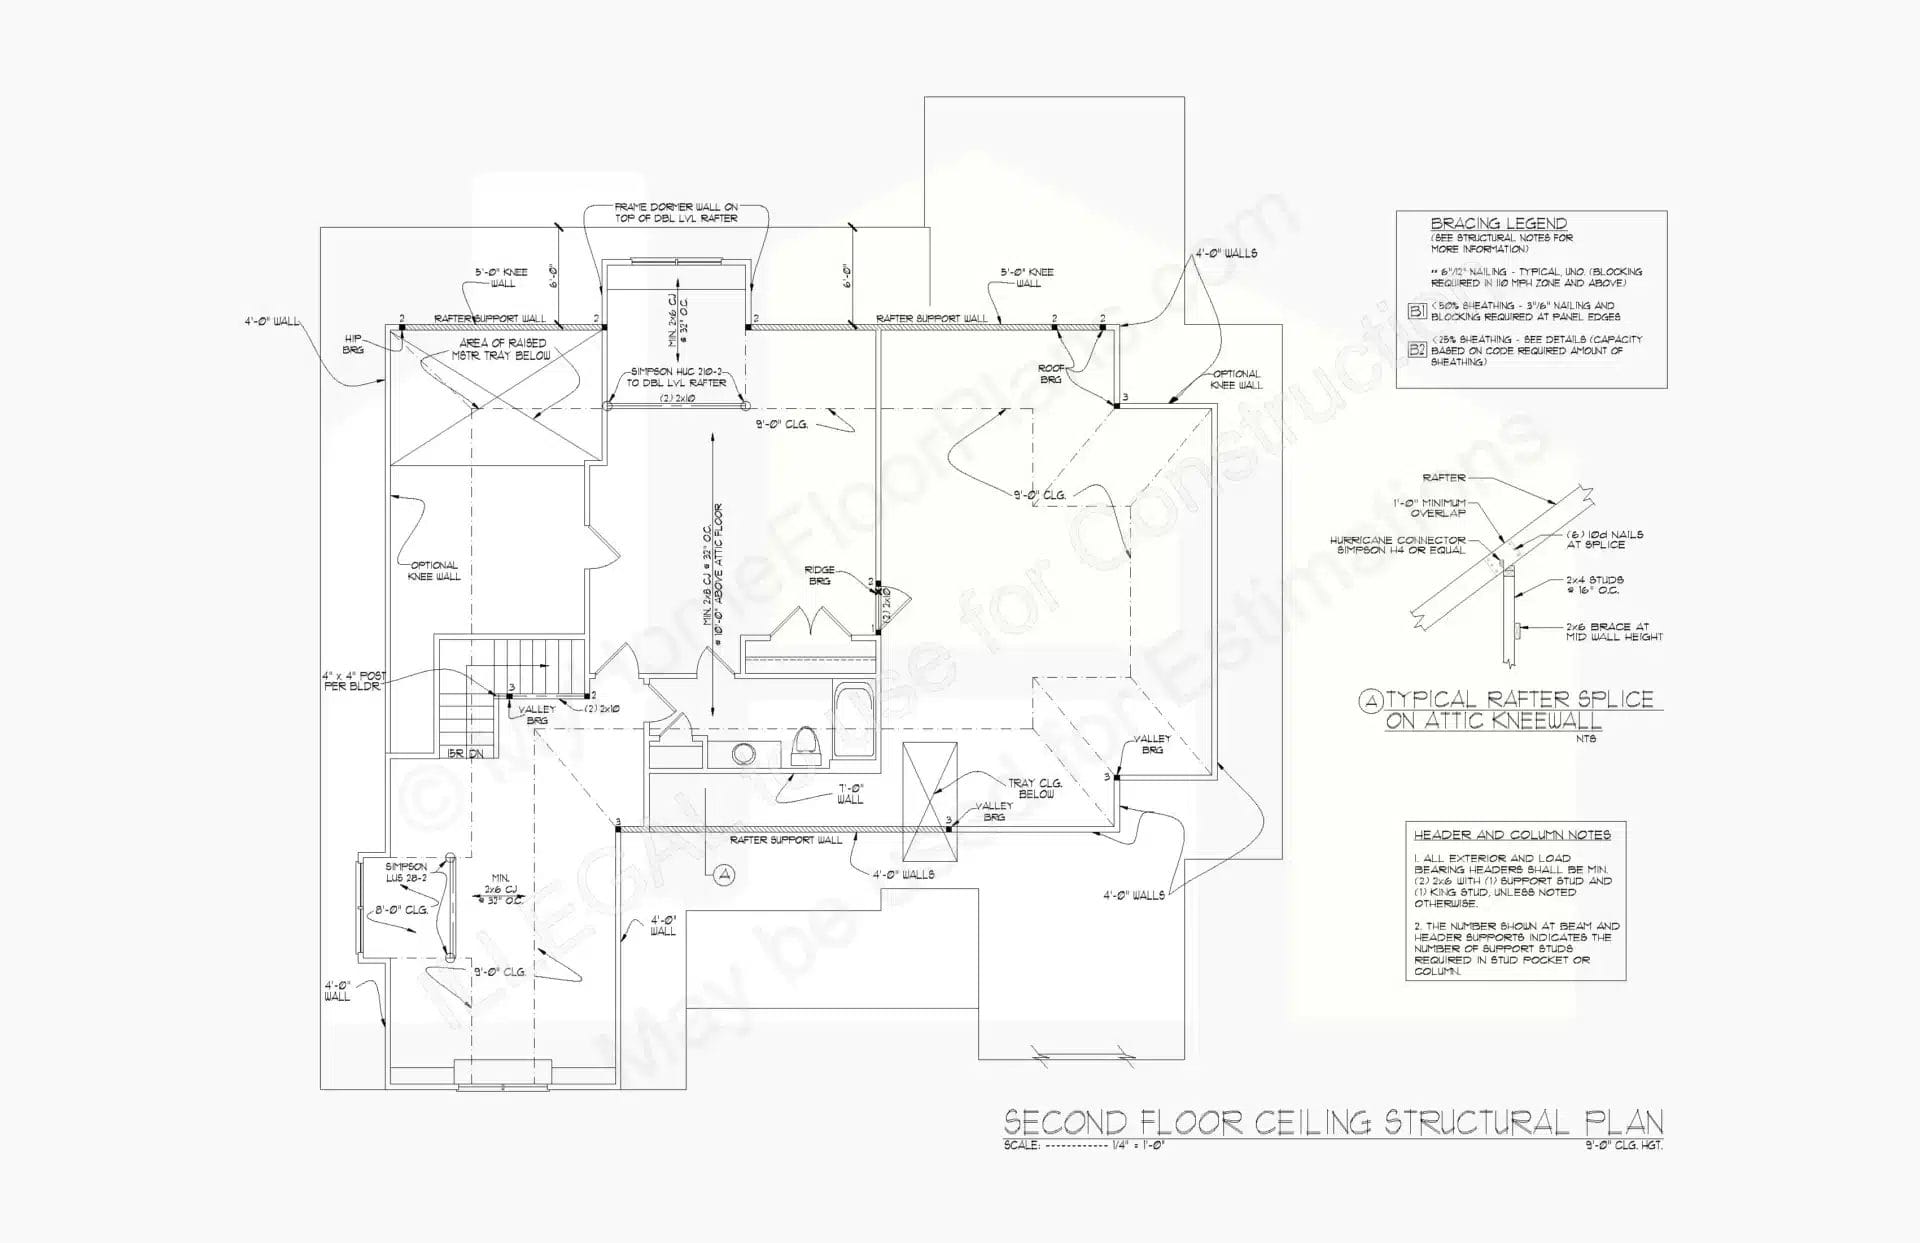 Detailed architectural blueprint of a 13-1721 ceiling structural design, featuring various labeled sections, measurements, and beam placements, with annotations and technical specifications.